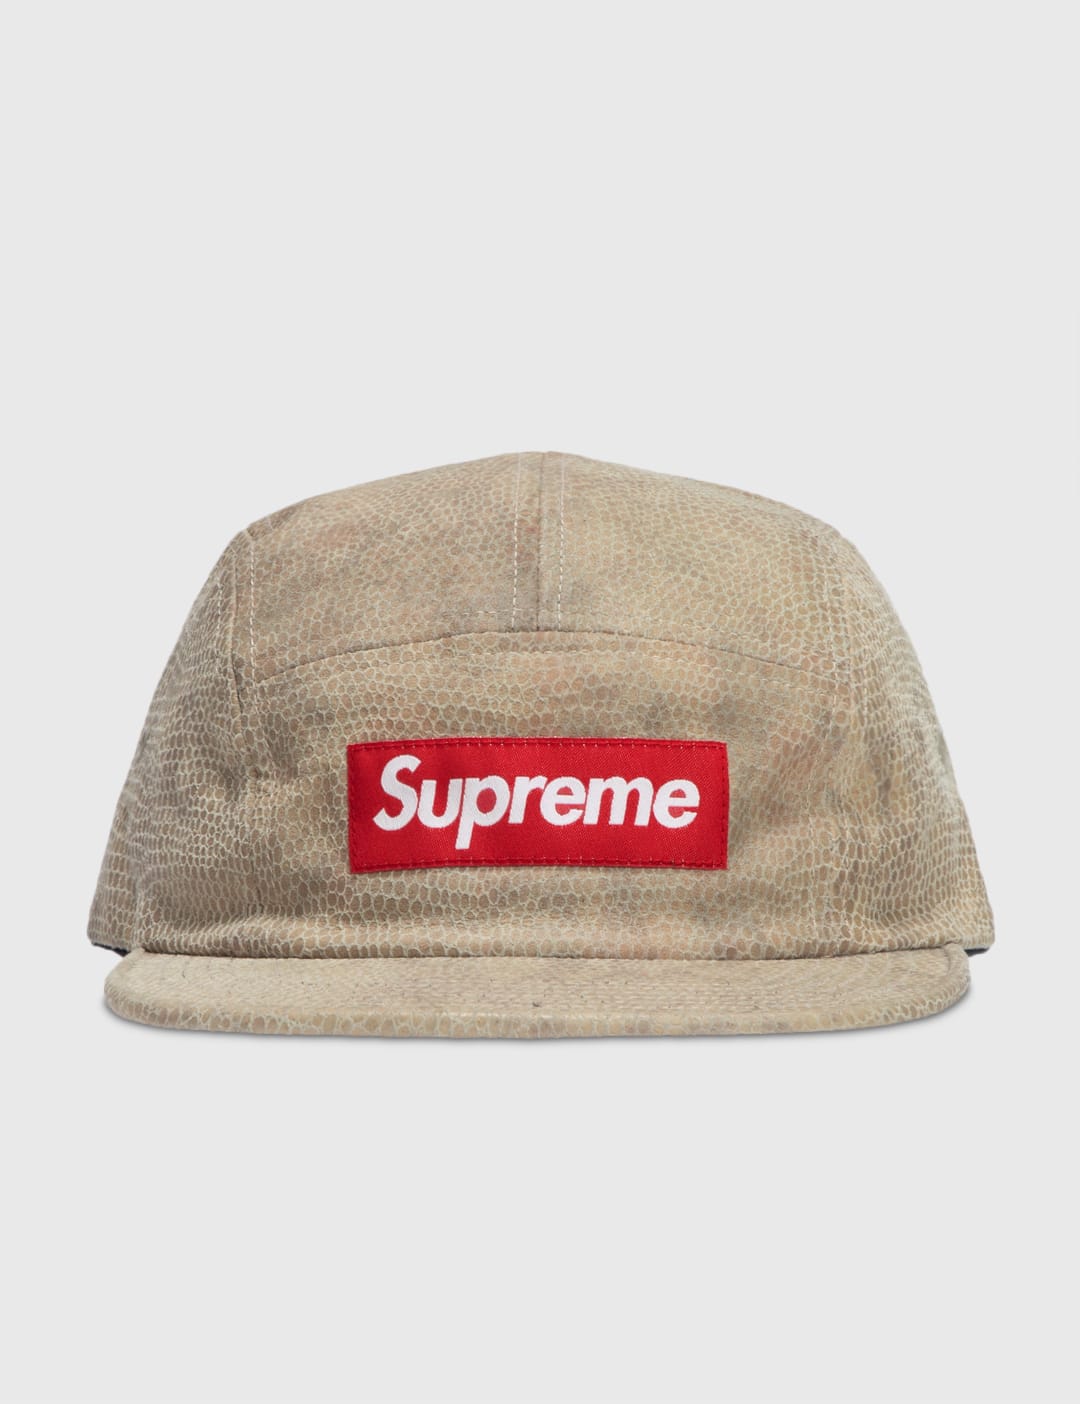 Supreme - Supreme Python Camp Cap | HBX - Globally Curated Fashion and  Lifestyle by Hypebeast